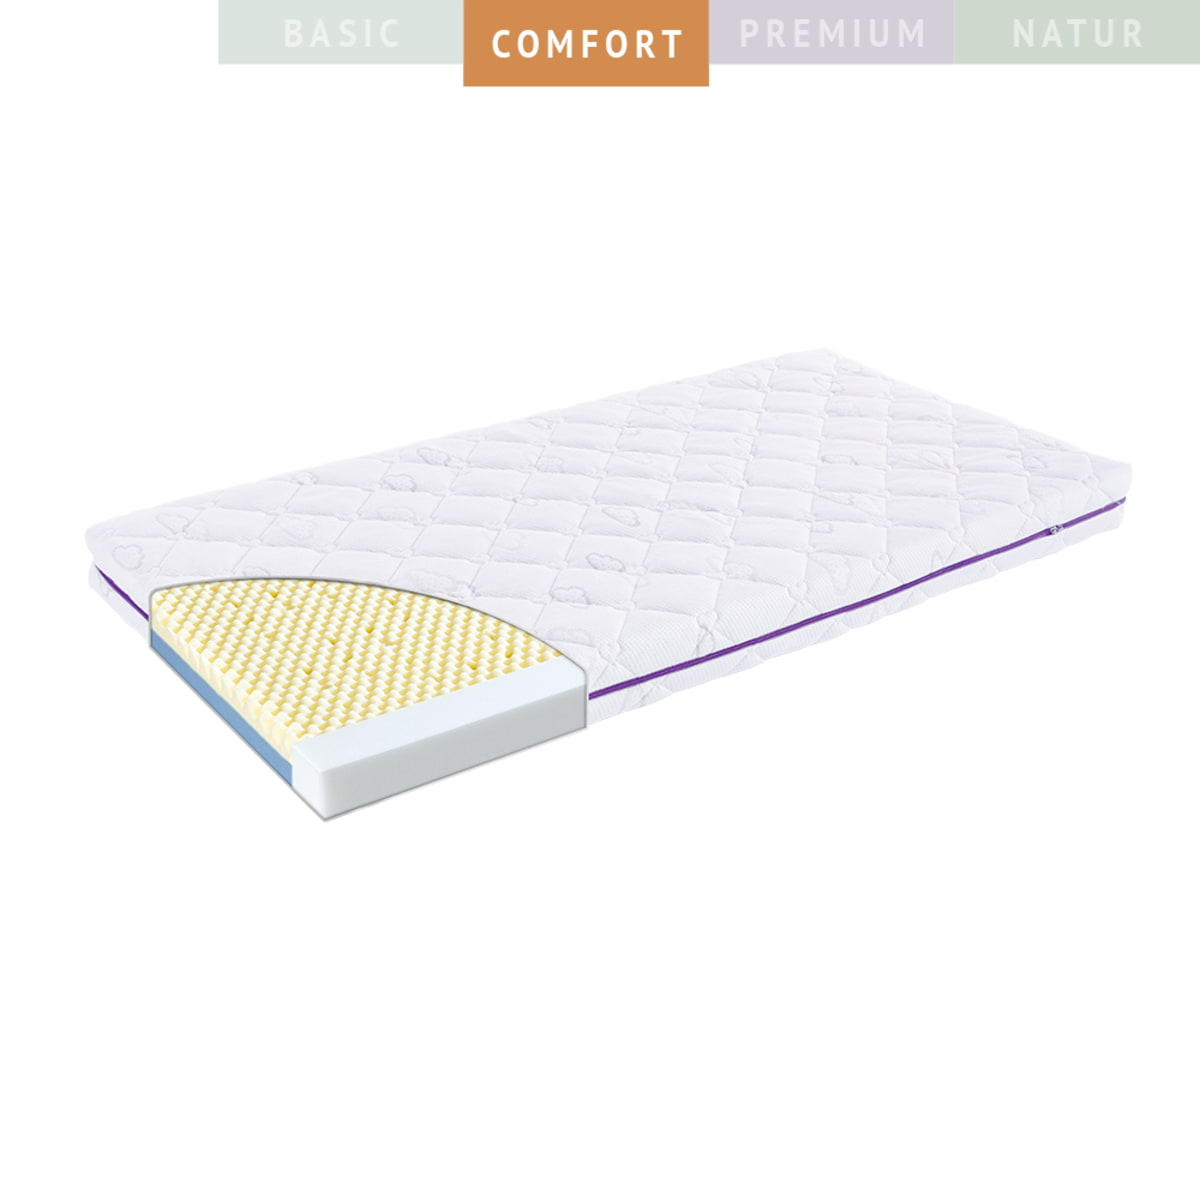 Babymattress Comfort Sunset with nubbed structure in the cold foam core